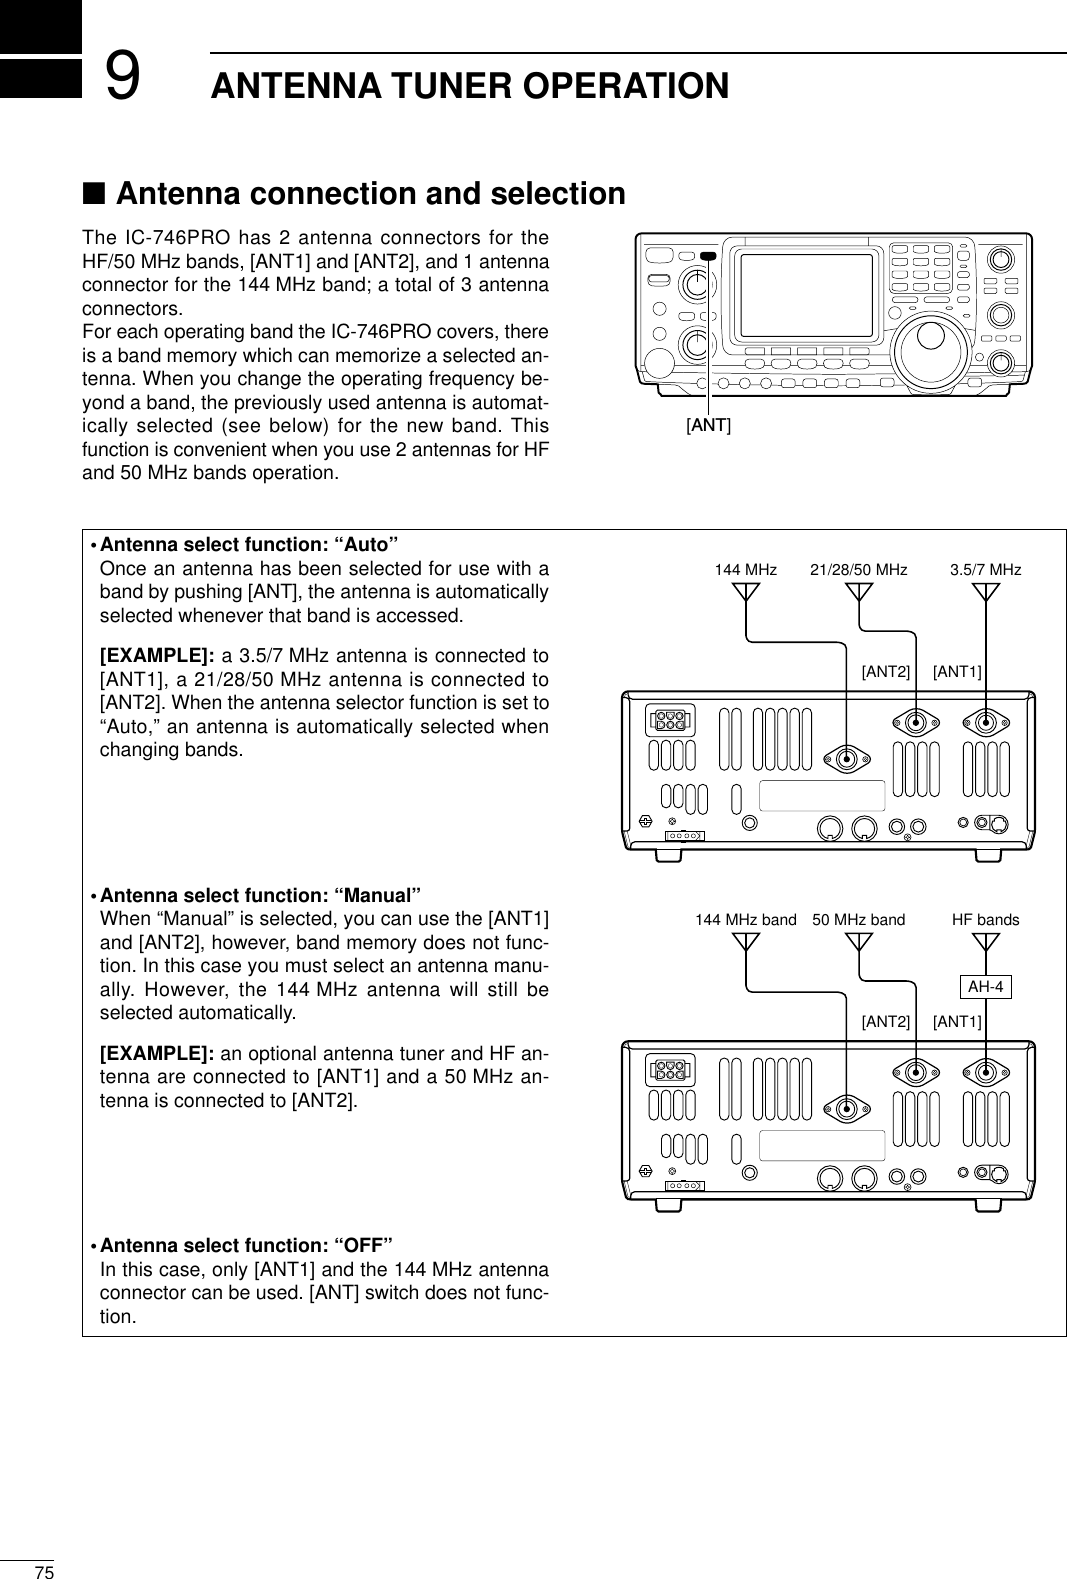 975ANTENNA TUNER OPERATION■Antenna connection and selectionThe IC-746PRO has 2 antenna connectors for theHF/50 MHz bands, [ANT1] and [ANT2], and 1 antennaconnector for the 144 MHz band; a total of 3 antennaconnectors.For each operating band the IC-746PRO covers, thereis a band memory which can memorize a selected an-tenna. When you change the operating frequency be-yond a band, the previously used antenna is automat-ically selected (see below) for the new band. Thisfunction is convenient when you use 2 antennas for HFand 50 MHz bands operation.•Antenna select function: “Auto”Once an antenna has been selected for use with aband by pushing [ANT], the antenna is automaticallyselected whenever that band is accessed.[EXAMPLE]: a 3.5/7 MHz antenna is connected to[ANT1], a 21/28/50 MHz antenna is connected to[ANT2]. When the antenna selector function is set to“Auto,” an antenna is automatically selected whenchanging bands.•Antenna select function: “Manual”When “Manual” is selected, you can use the [ANT1]and [ANT2], however, band memory does not func-tion. In this case you must select an antenna manu-ally. However, the 144 MHz antenna will still beselected automatically.[EXAMPLE]: an optional antenna tuner and HF an-tenna are connected to [ANT1] and a 50 MHz an-tenna is connected to [ANT2].•Antenna select function: “OFF”In this case, only [ANT1] and the 144 MHz antennaconnector can be used. [ANT] switch does not func-tion.[ANT]144 MHz 21/28/50 MHz 3.5/7 MHz[ANT1][ANT2]144 MHz band 50 MHz band HF bands[ANT1][ANT2]AH-4